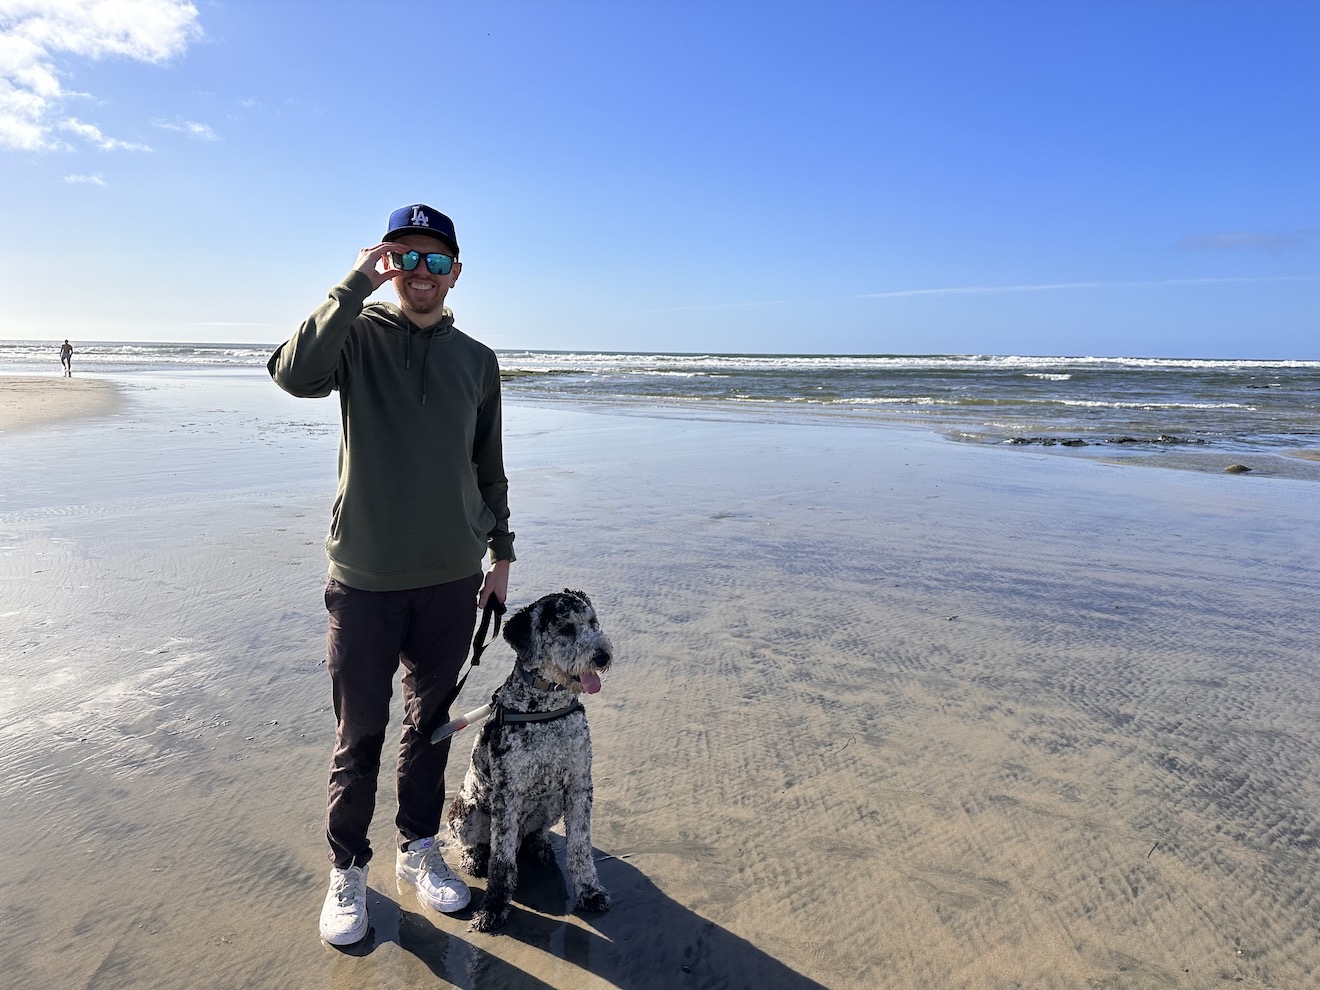 A photograph of my dog Dutch and I at Del Mar dog beach in southern California, looking out over the ocean with a mostly clear blue sky